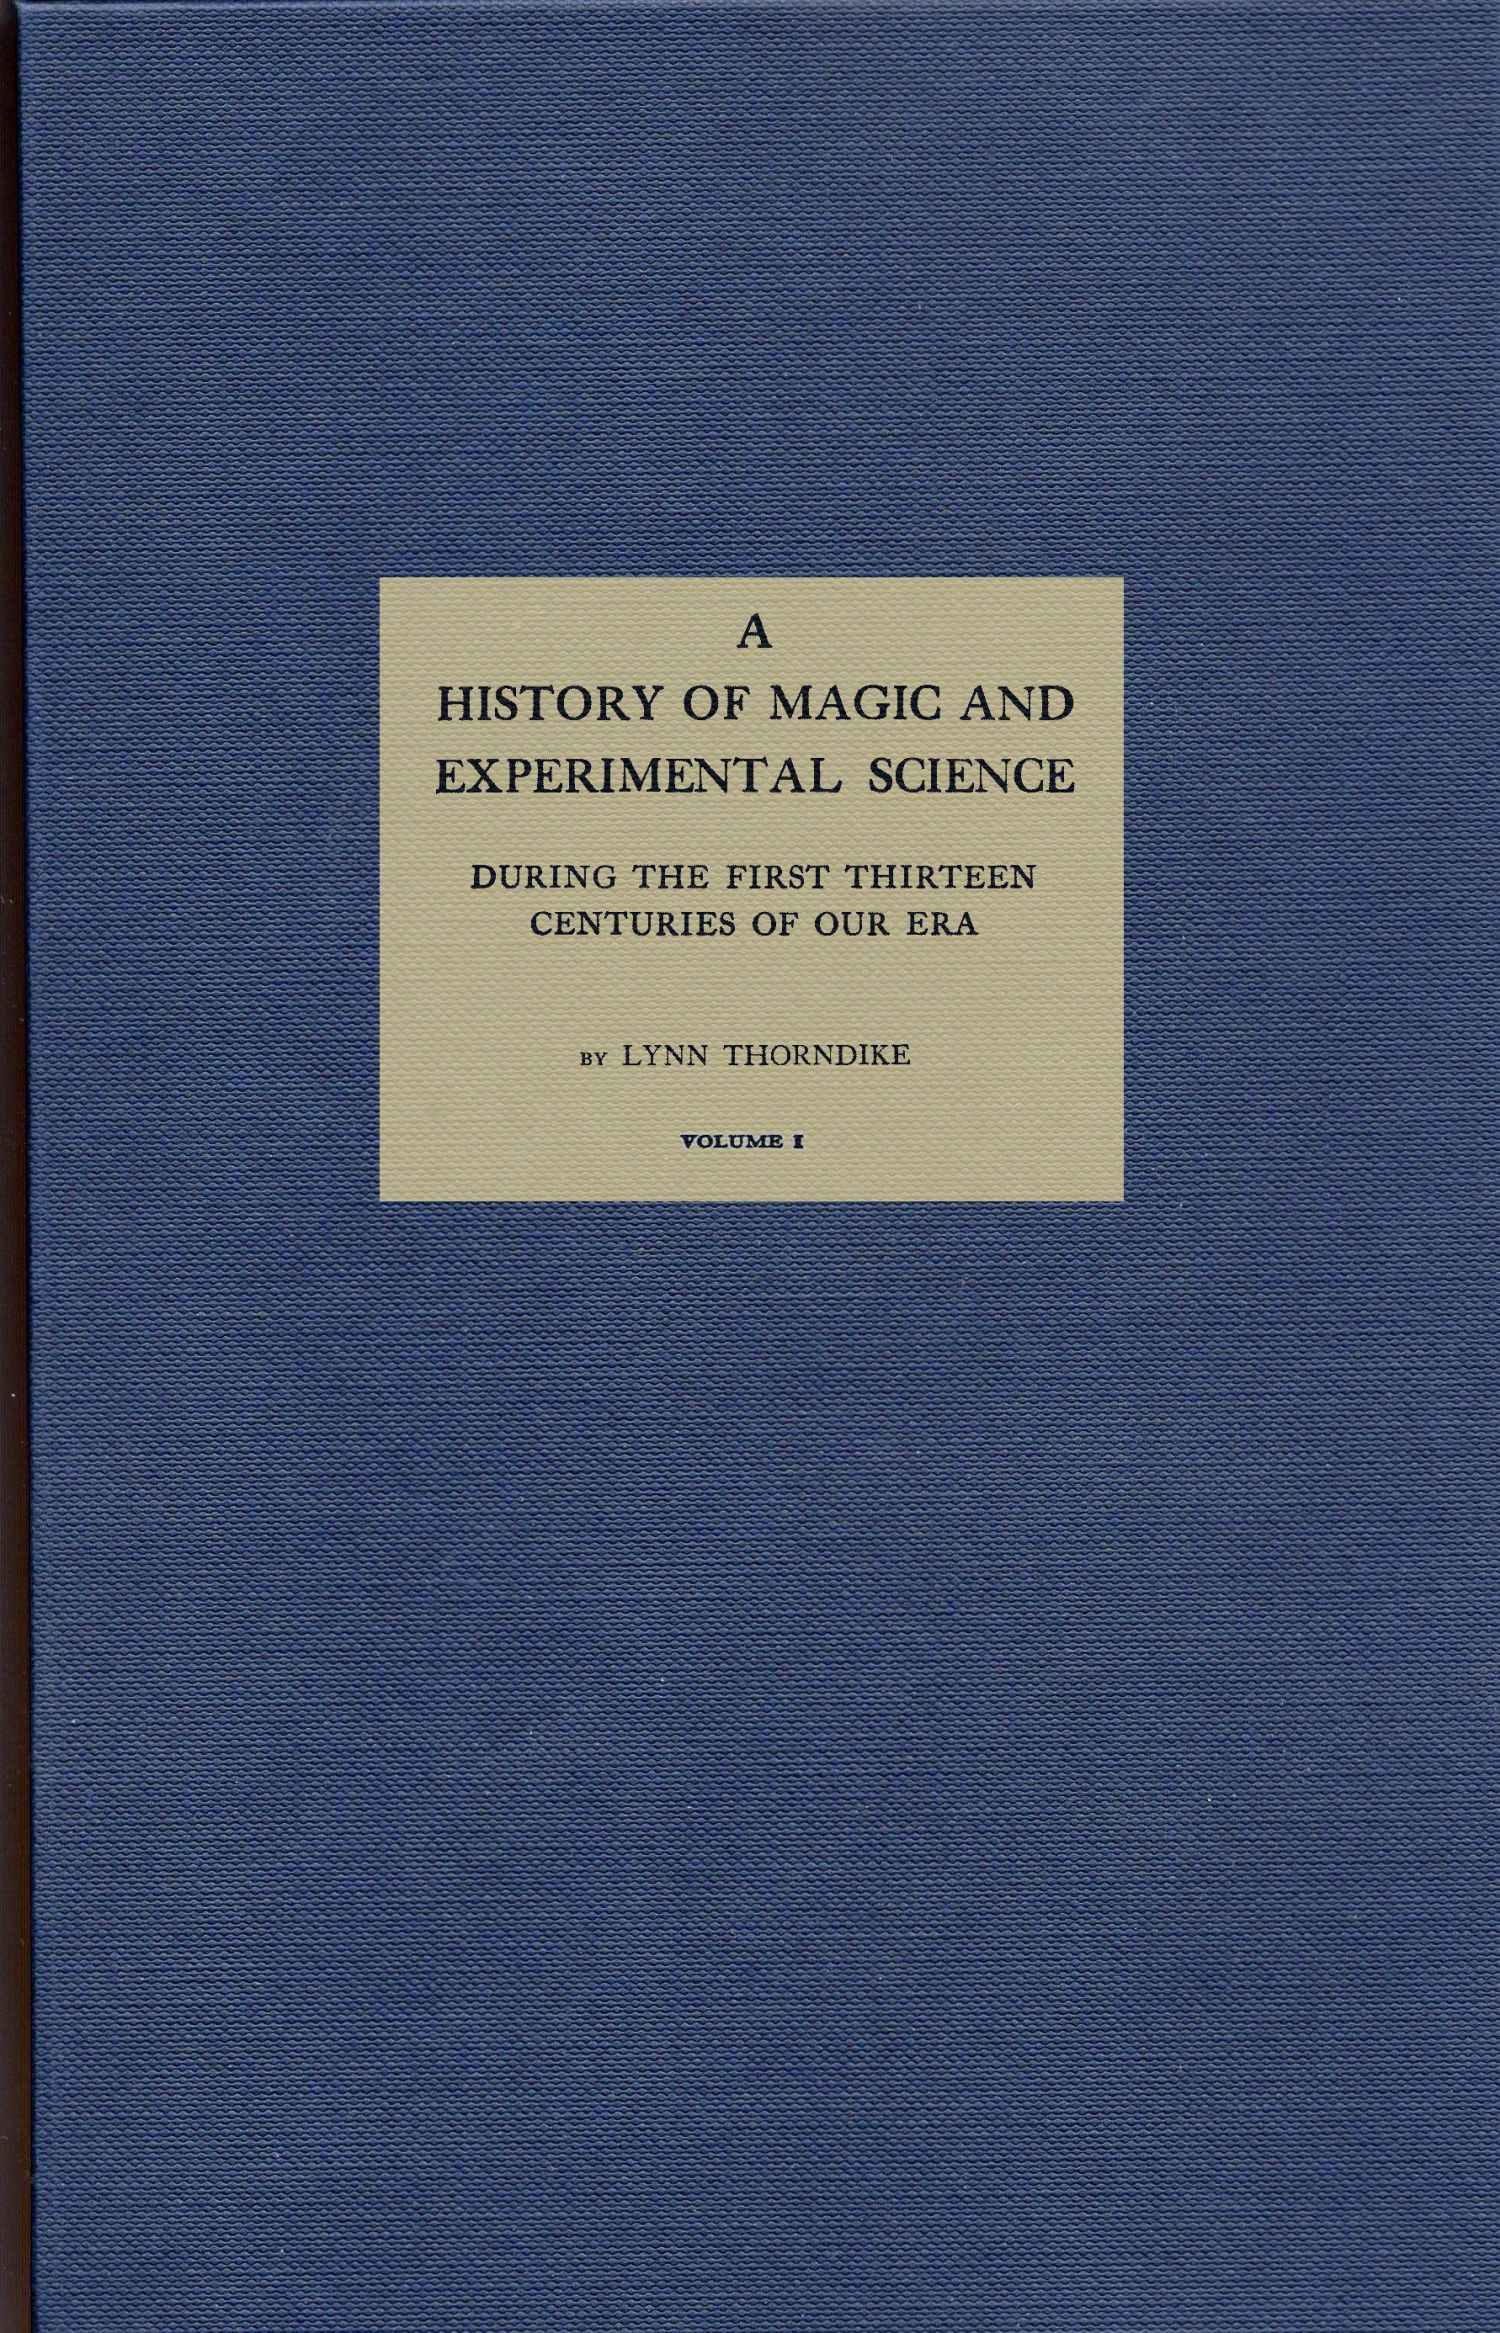 A History of Magic and Experimental Science, Volume 1 (of 2)&#10;During the First Thirteen Centuries of Our Era